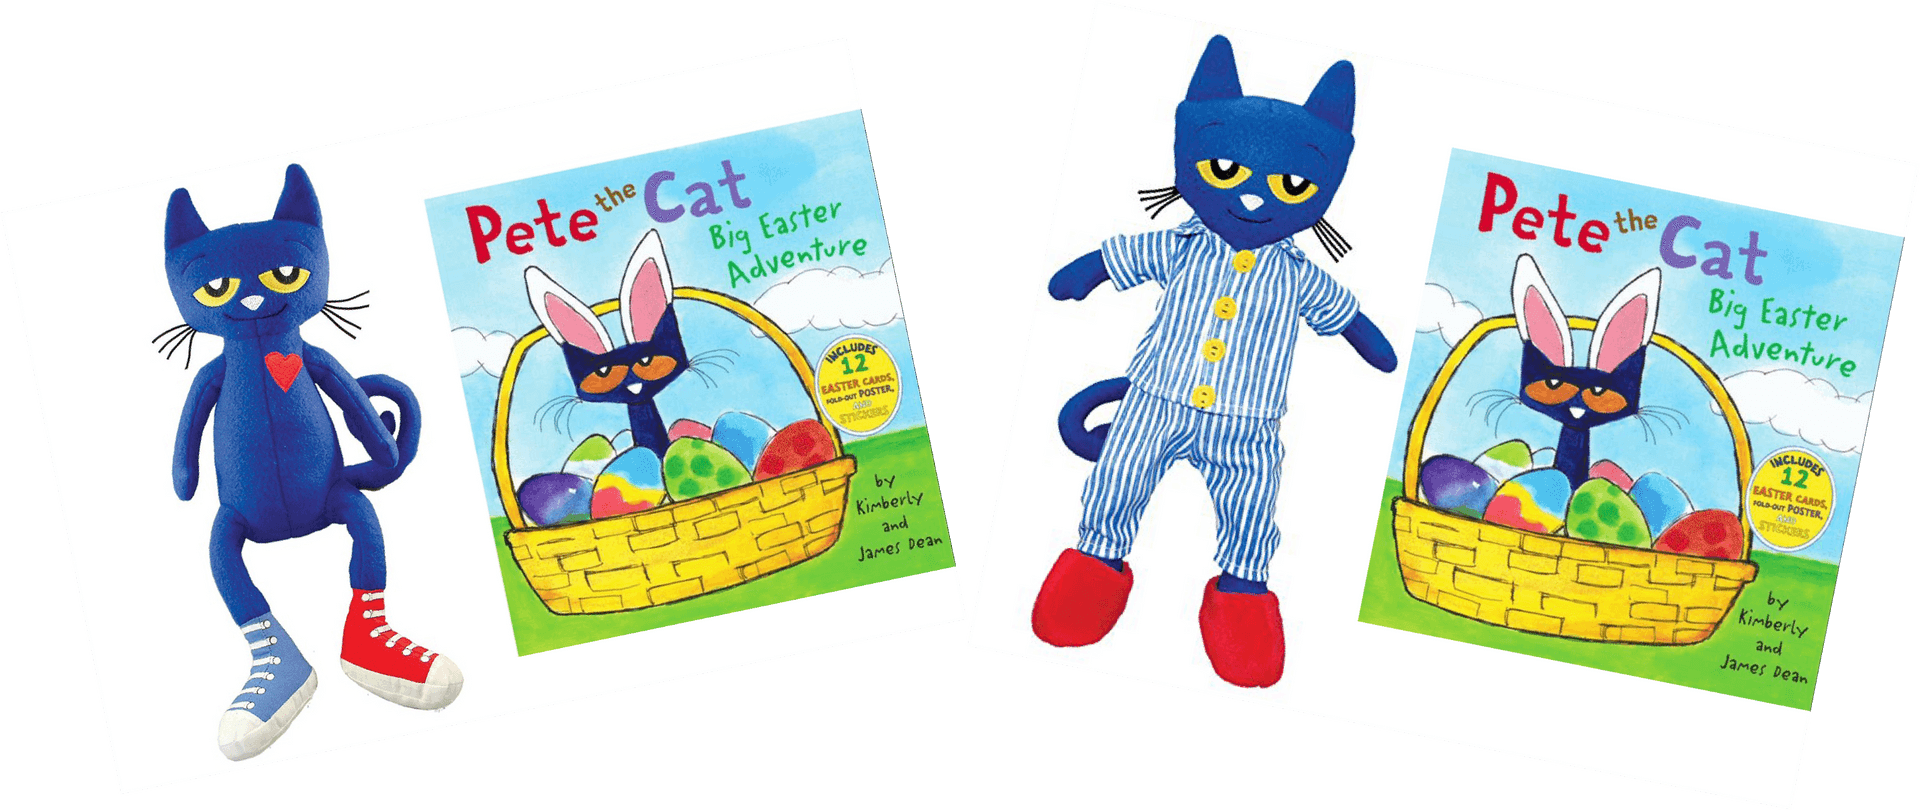 Pete The Cat Easter Adventure Promotional Material PNG